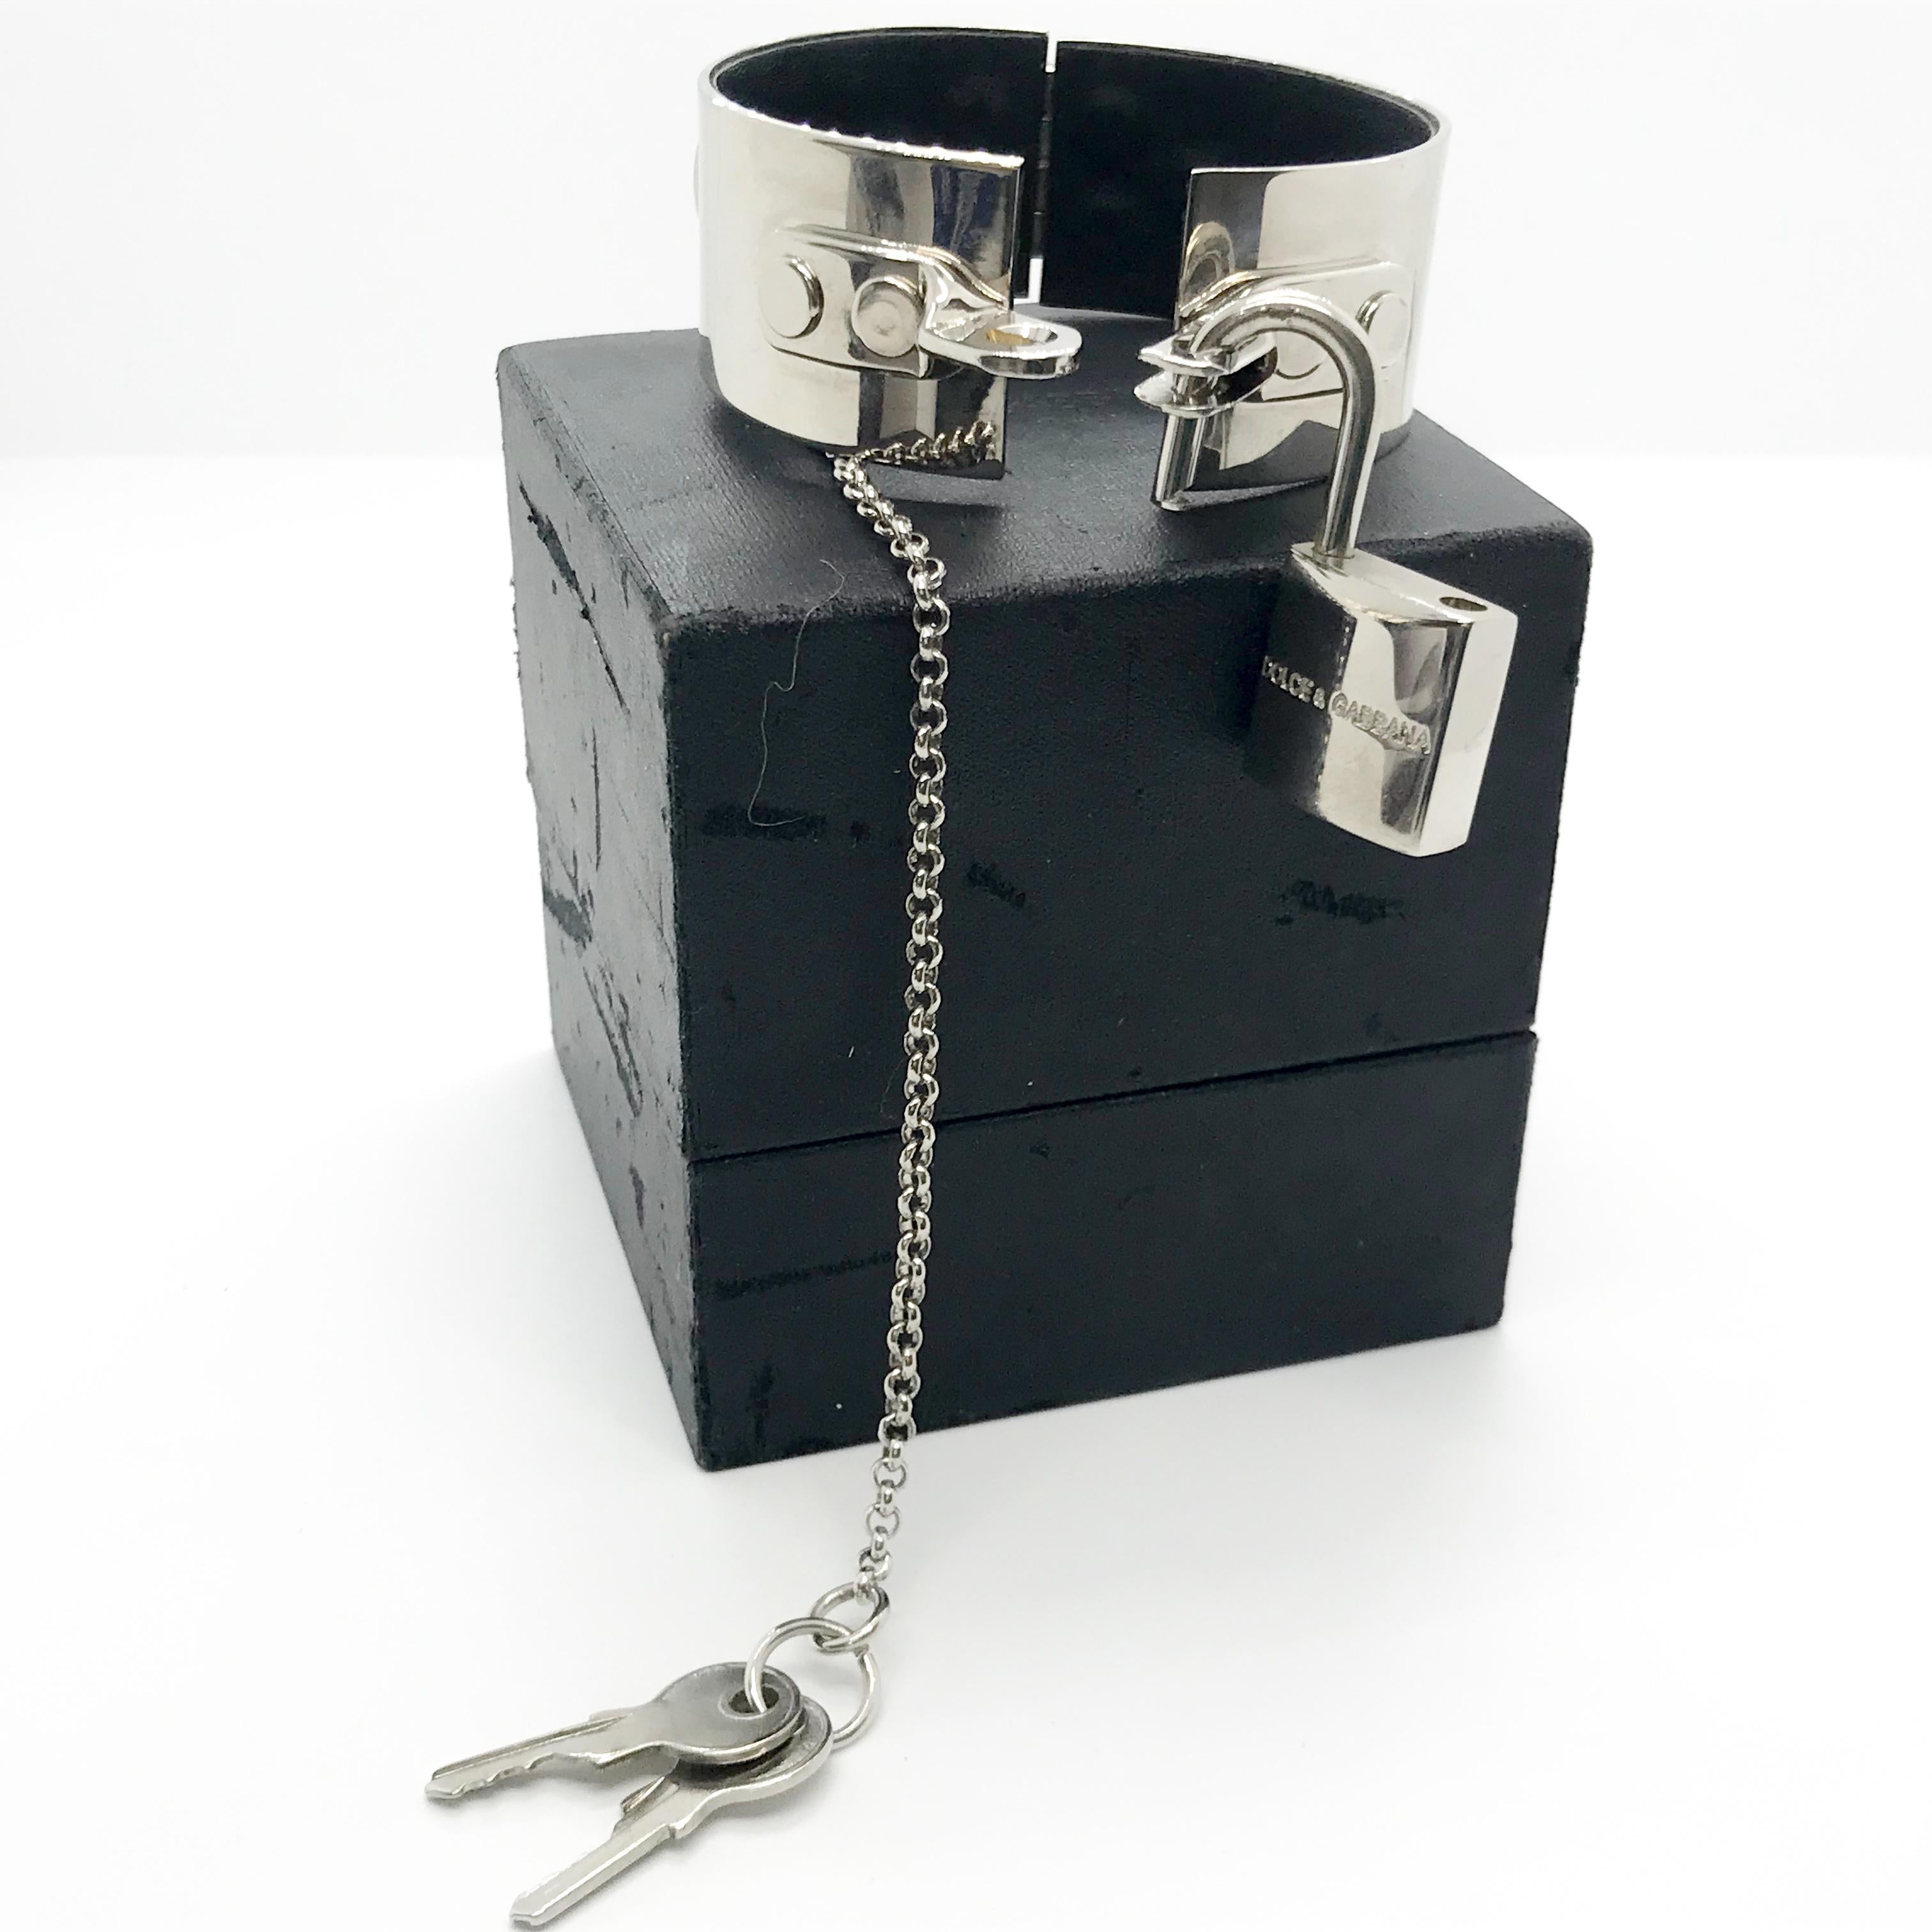 Dolce & Gabbana 1999 Bondage Handcuff Runway Bracelet

From the bondage collection 1999.  A real collectors item.

Silver metal with black leather on the inside. Comes with two keys and original box. 

Small-medium size - Women’s. 

